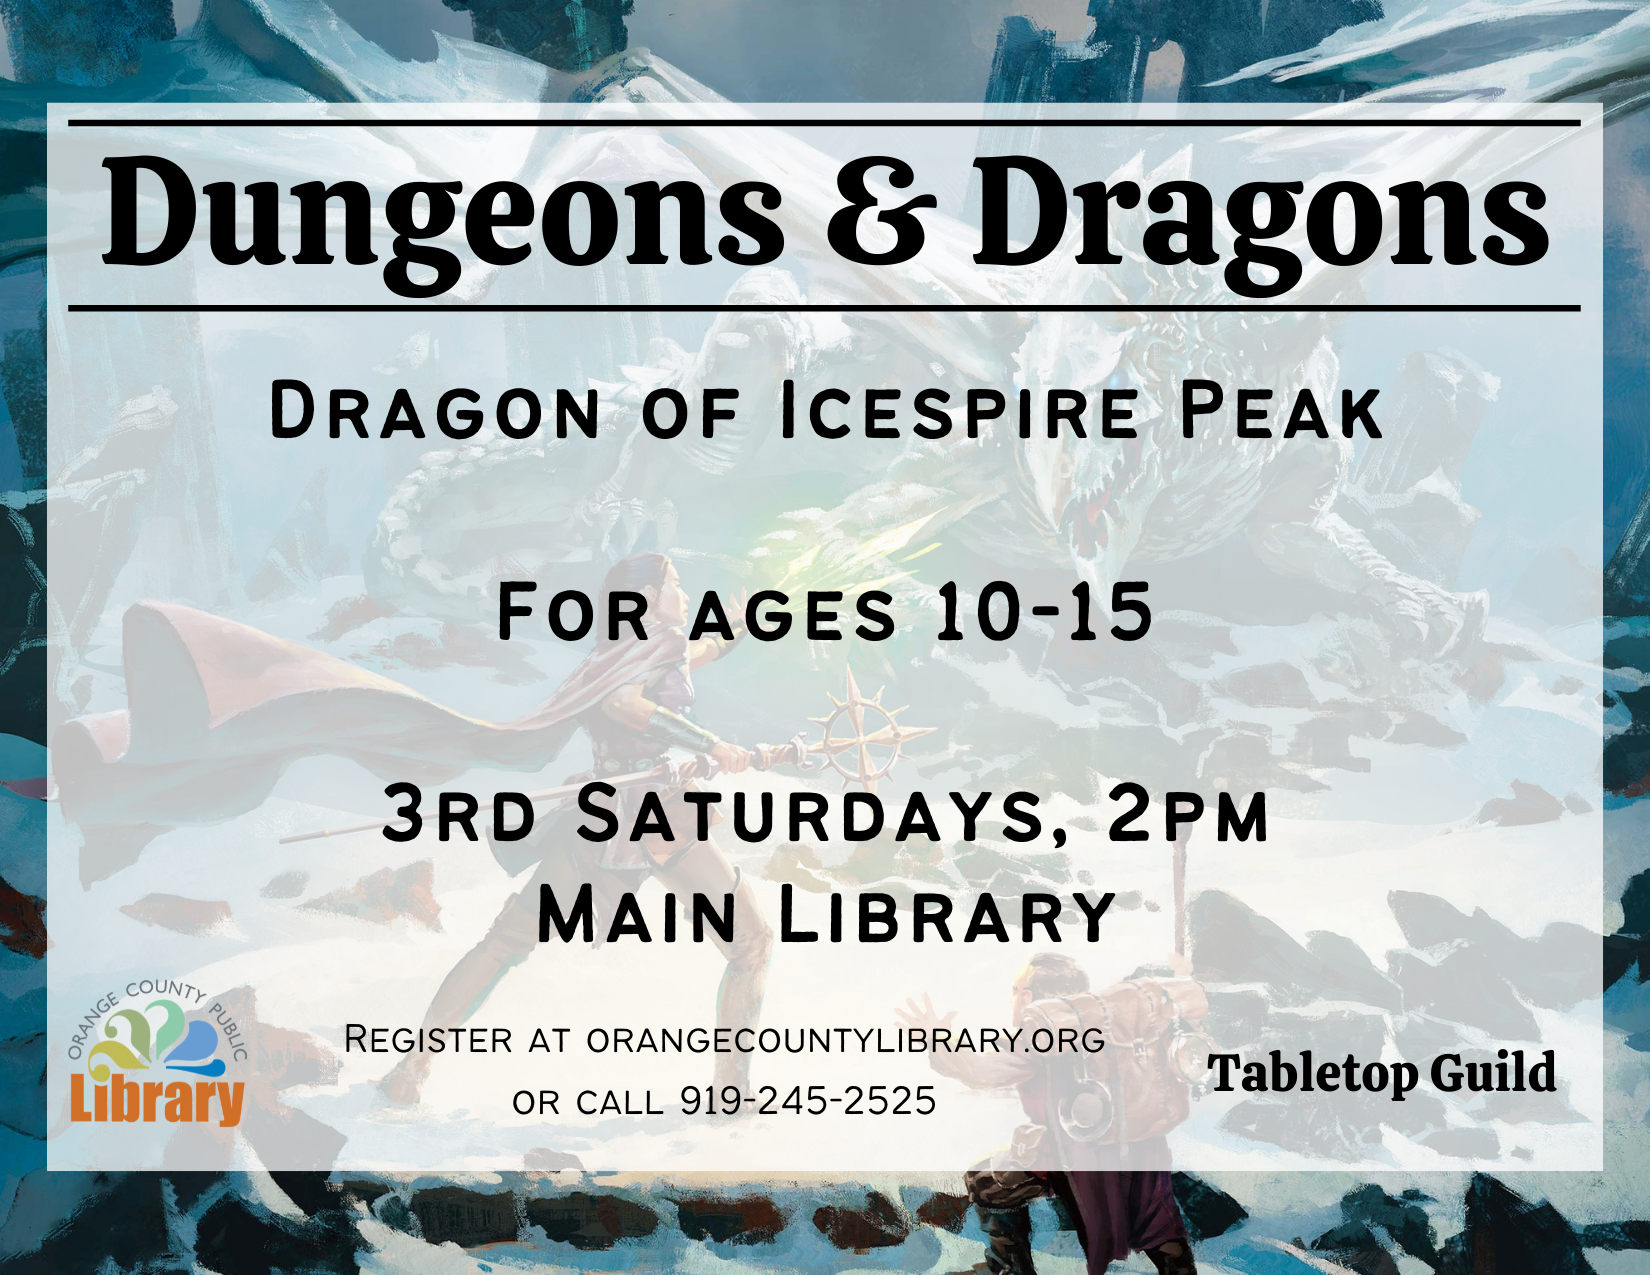 Dungeons & Dragons: Dragon of Icespire Peak. For ages 10-15. 3rd Saturdays. 2pm. Main Library.